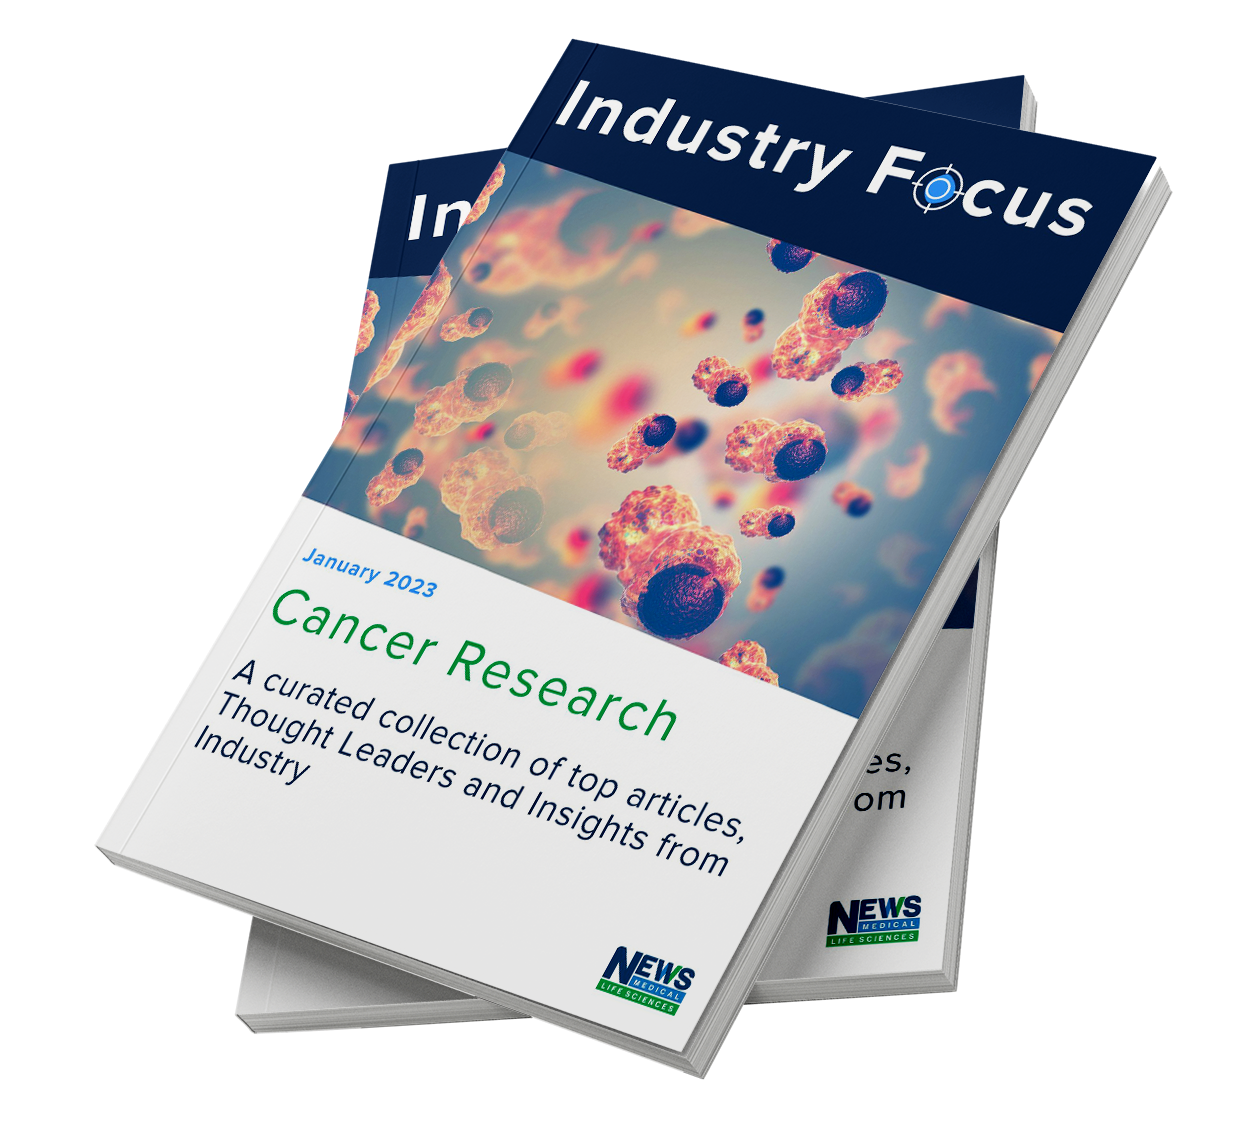 Cancer Research Industry Focus eBook